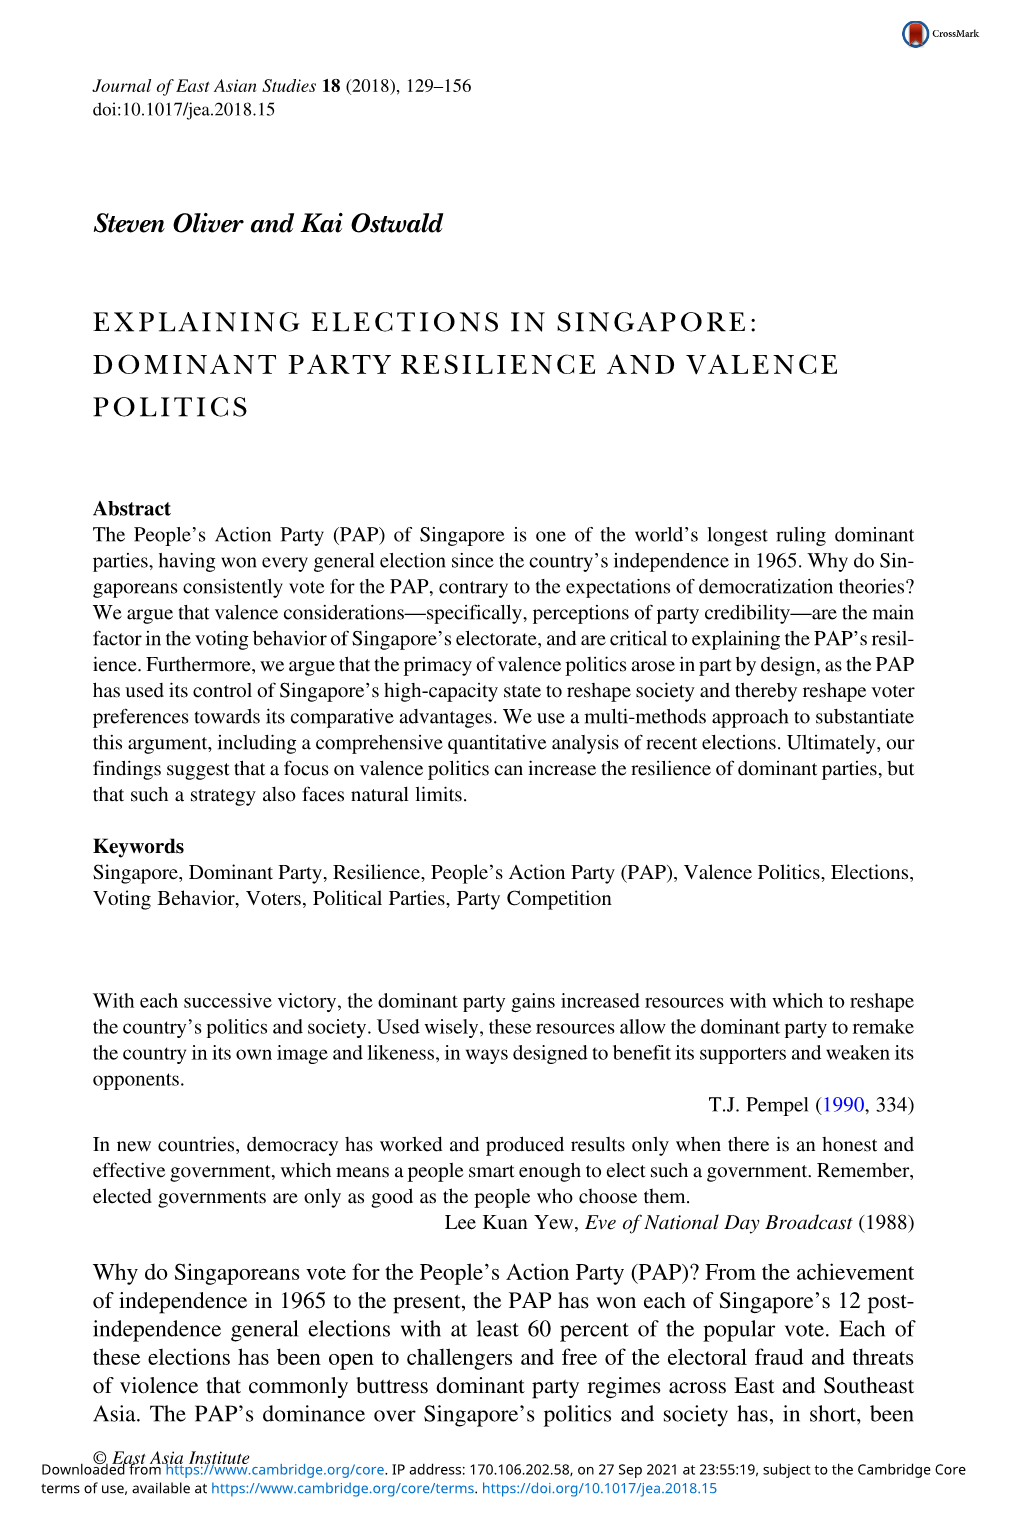 Explaining Elections in Singapore: Dominant Party Resilience and Valence Politics